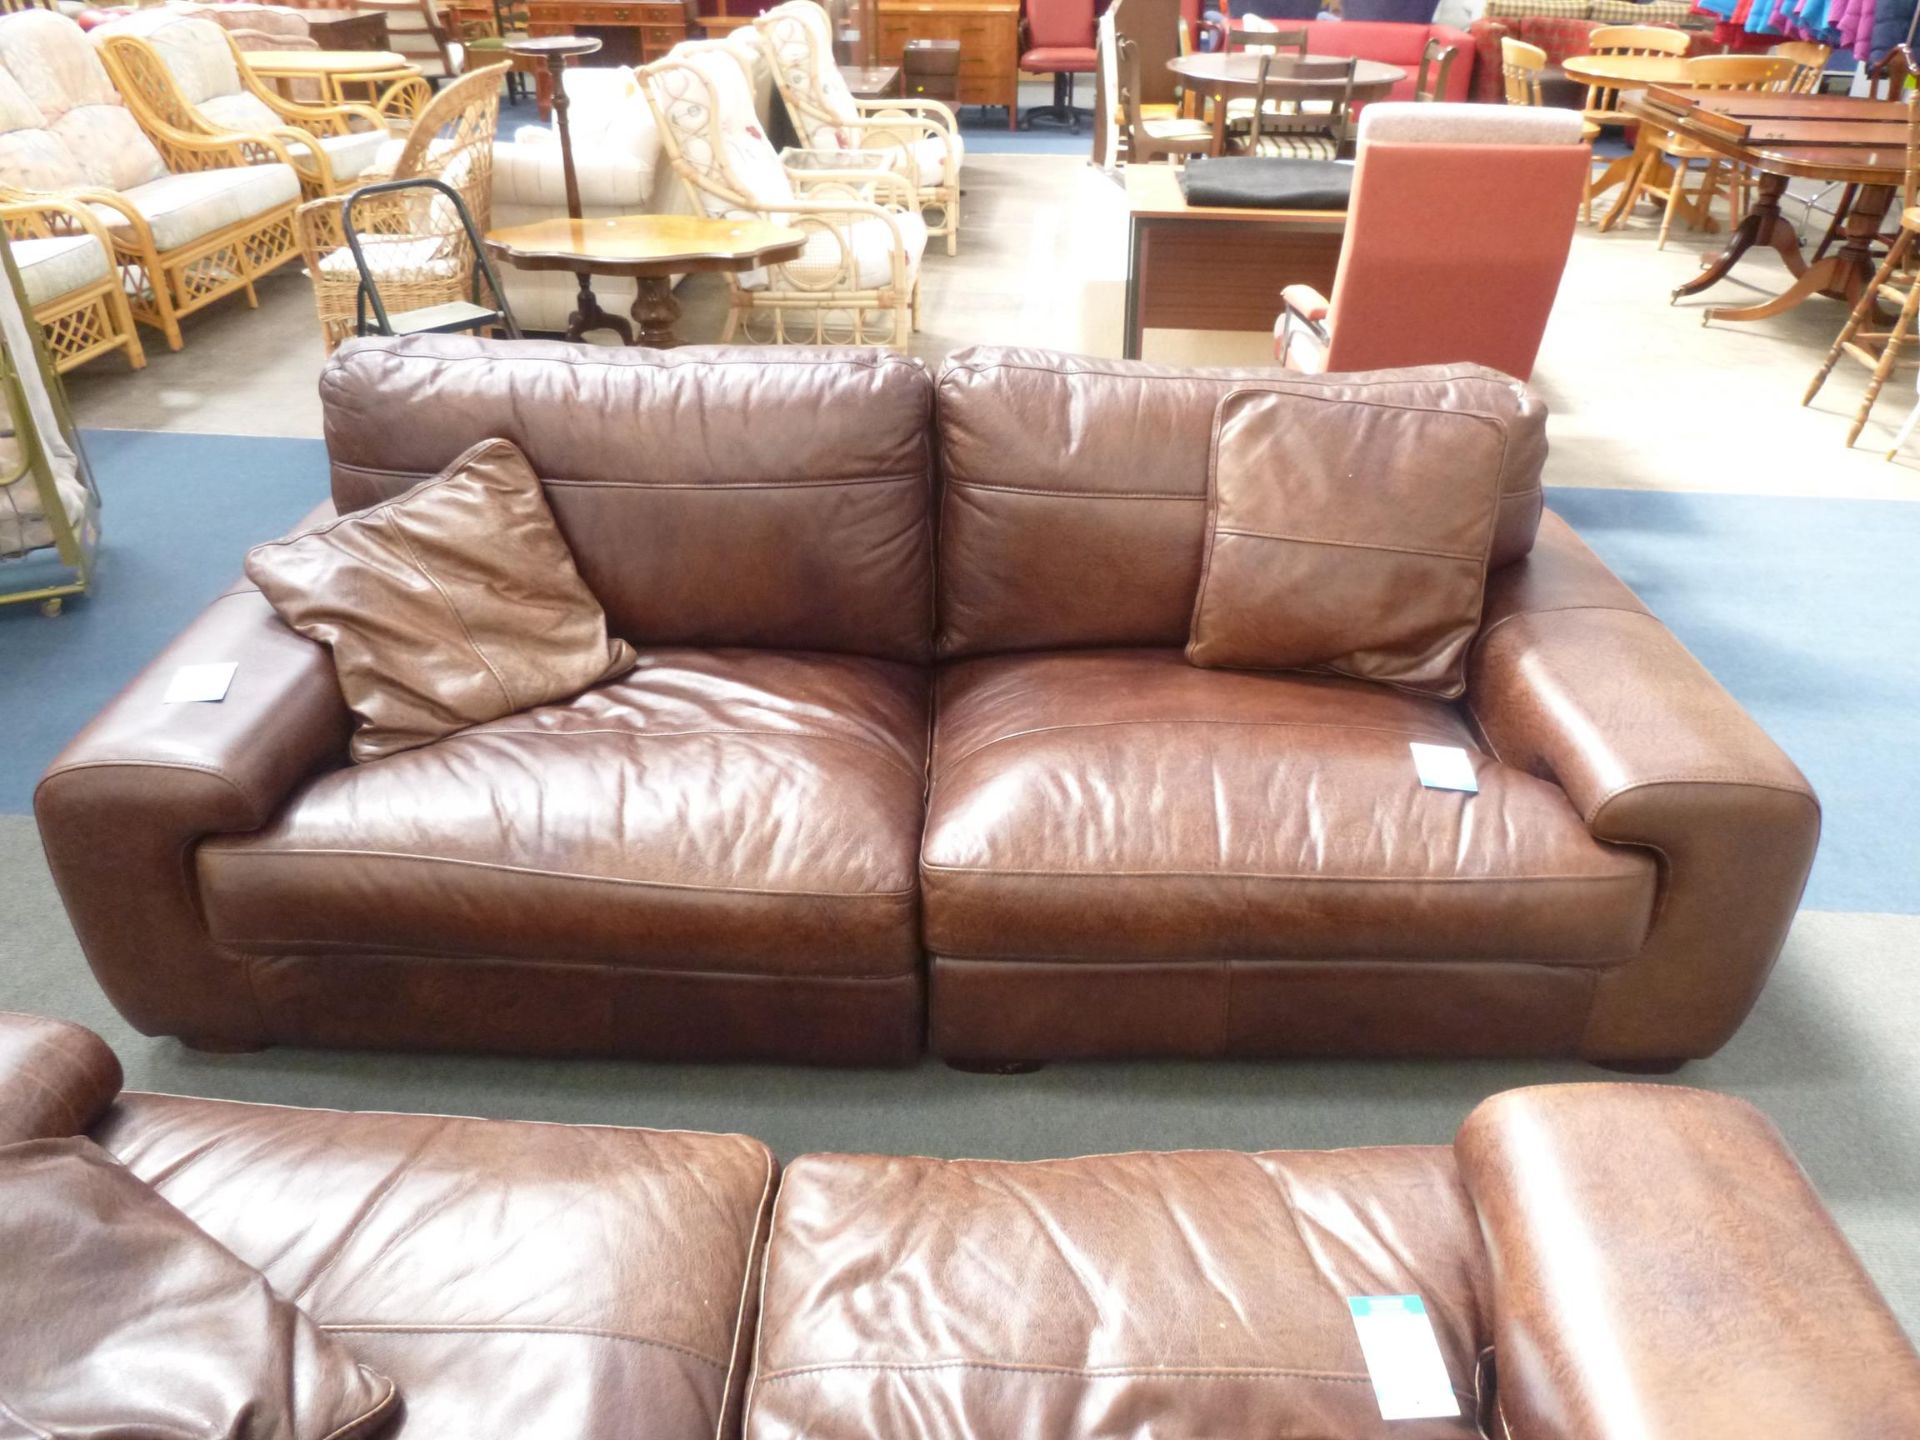 2 x Large Brown Leather Settee's. A 2 Seat and a 3 Seat (est. £150-£180) - Image 5 of 5